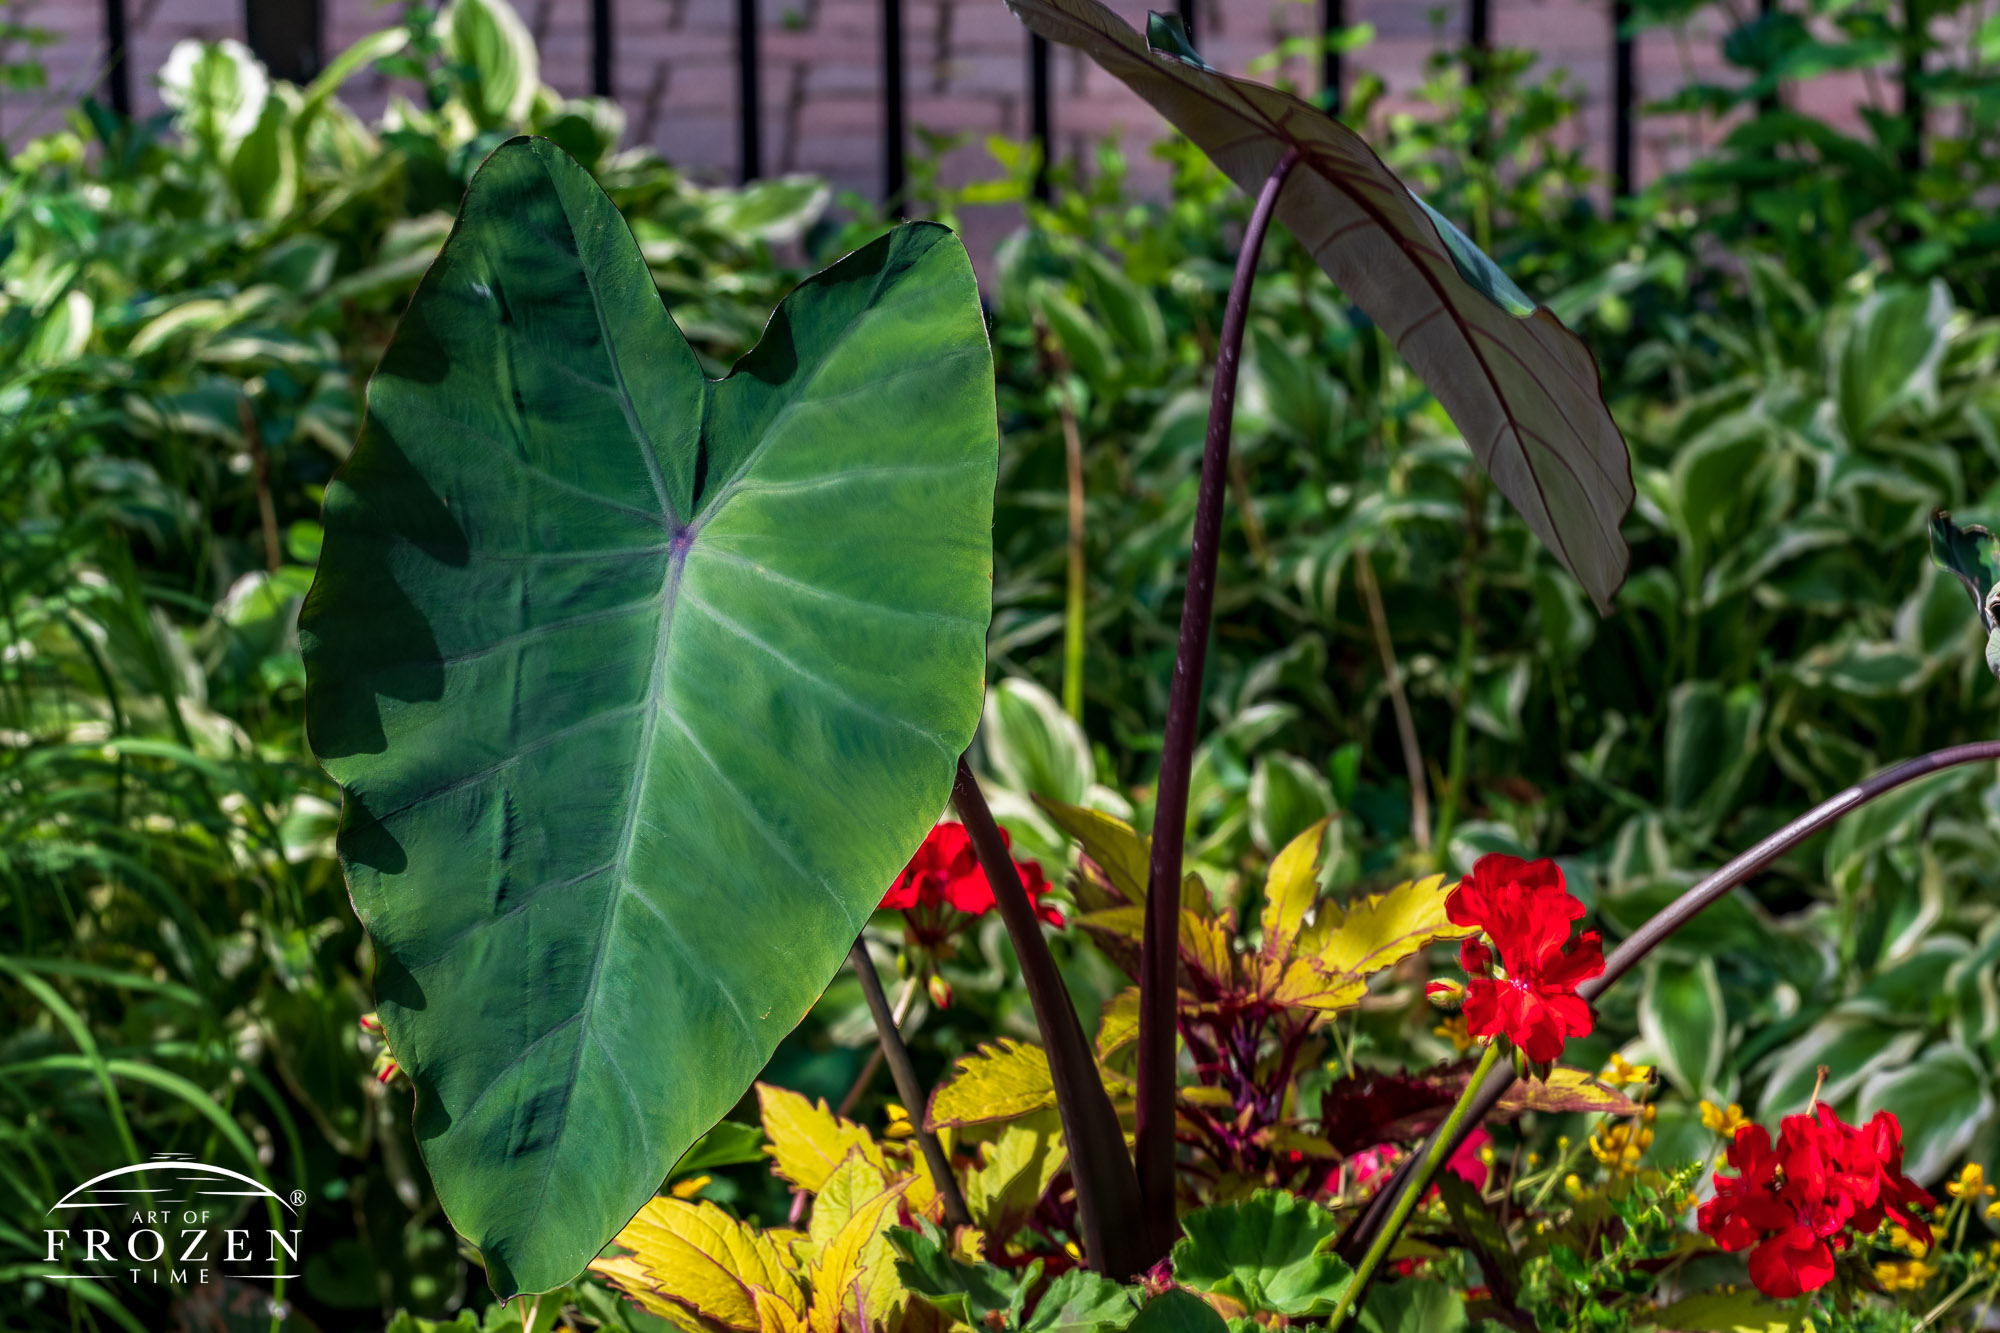 A large leaf plant called Elephant Ears where its burgundy-colored stem support the large green leaves